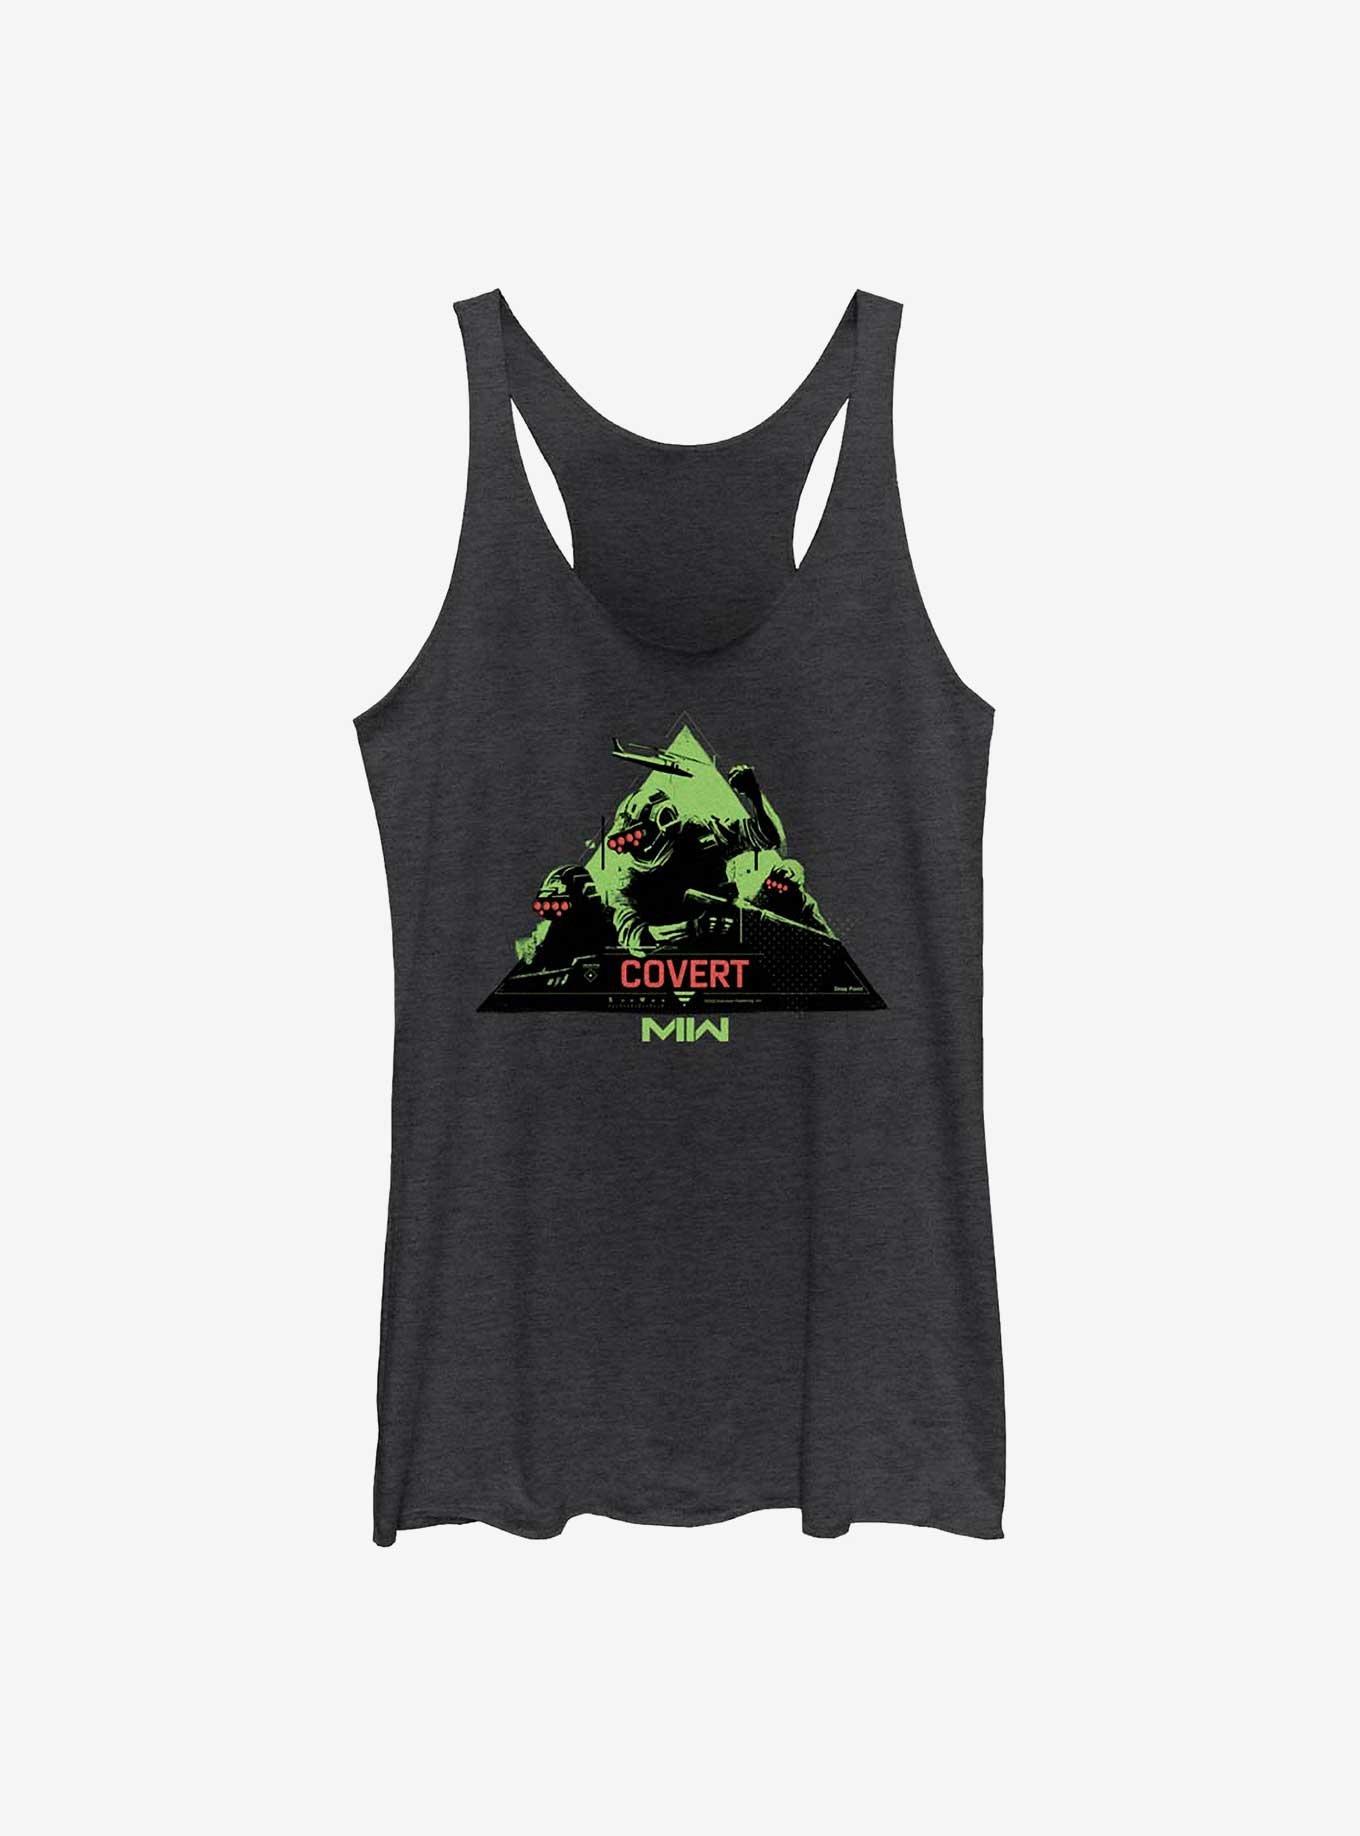 Call of Duty Mission Covert Womens Tank Top, , hi-res